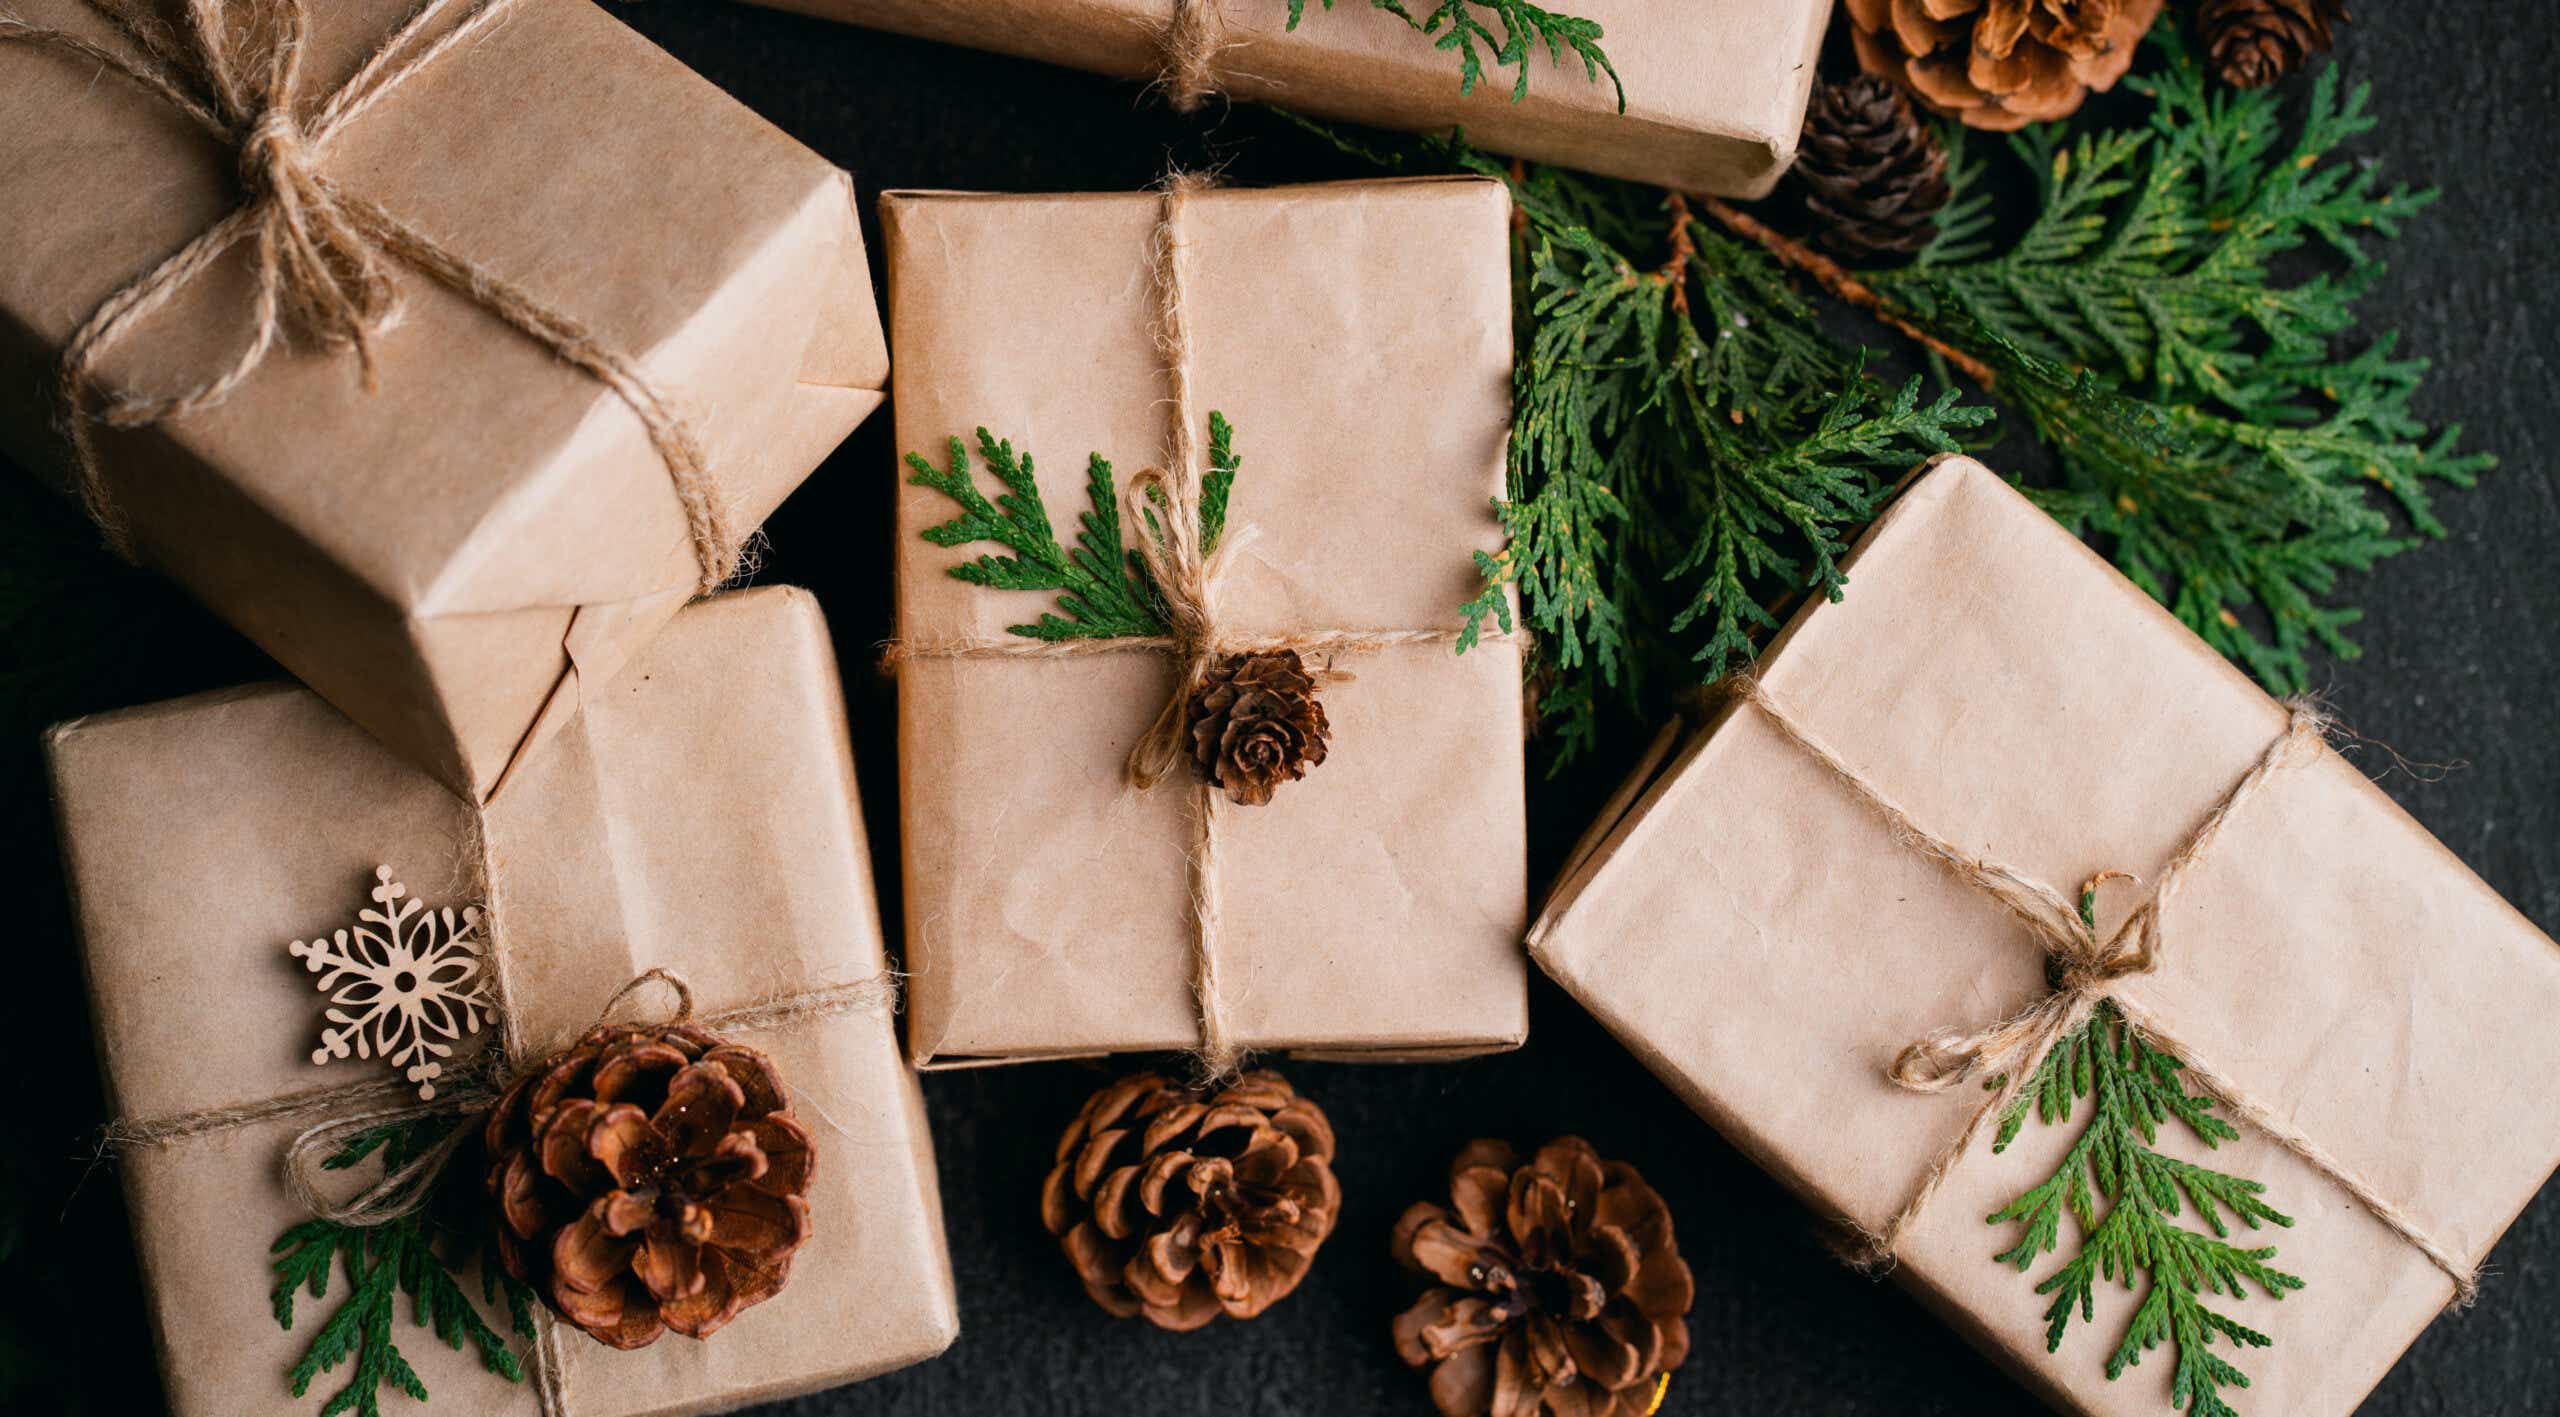 Beautifully wrapped gifts